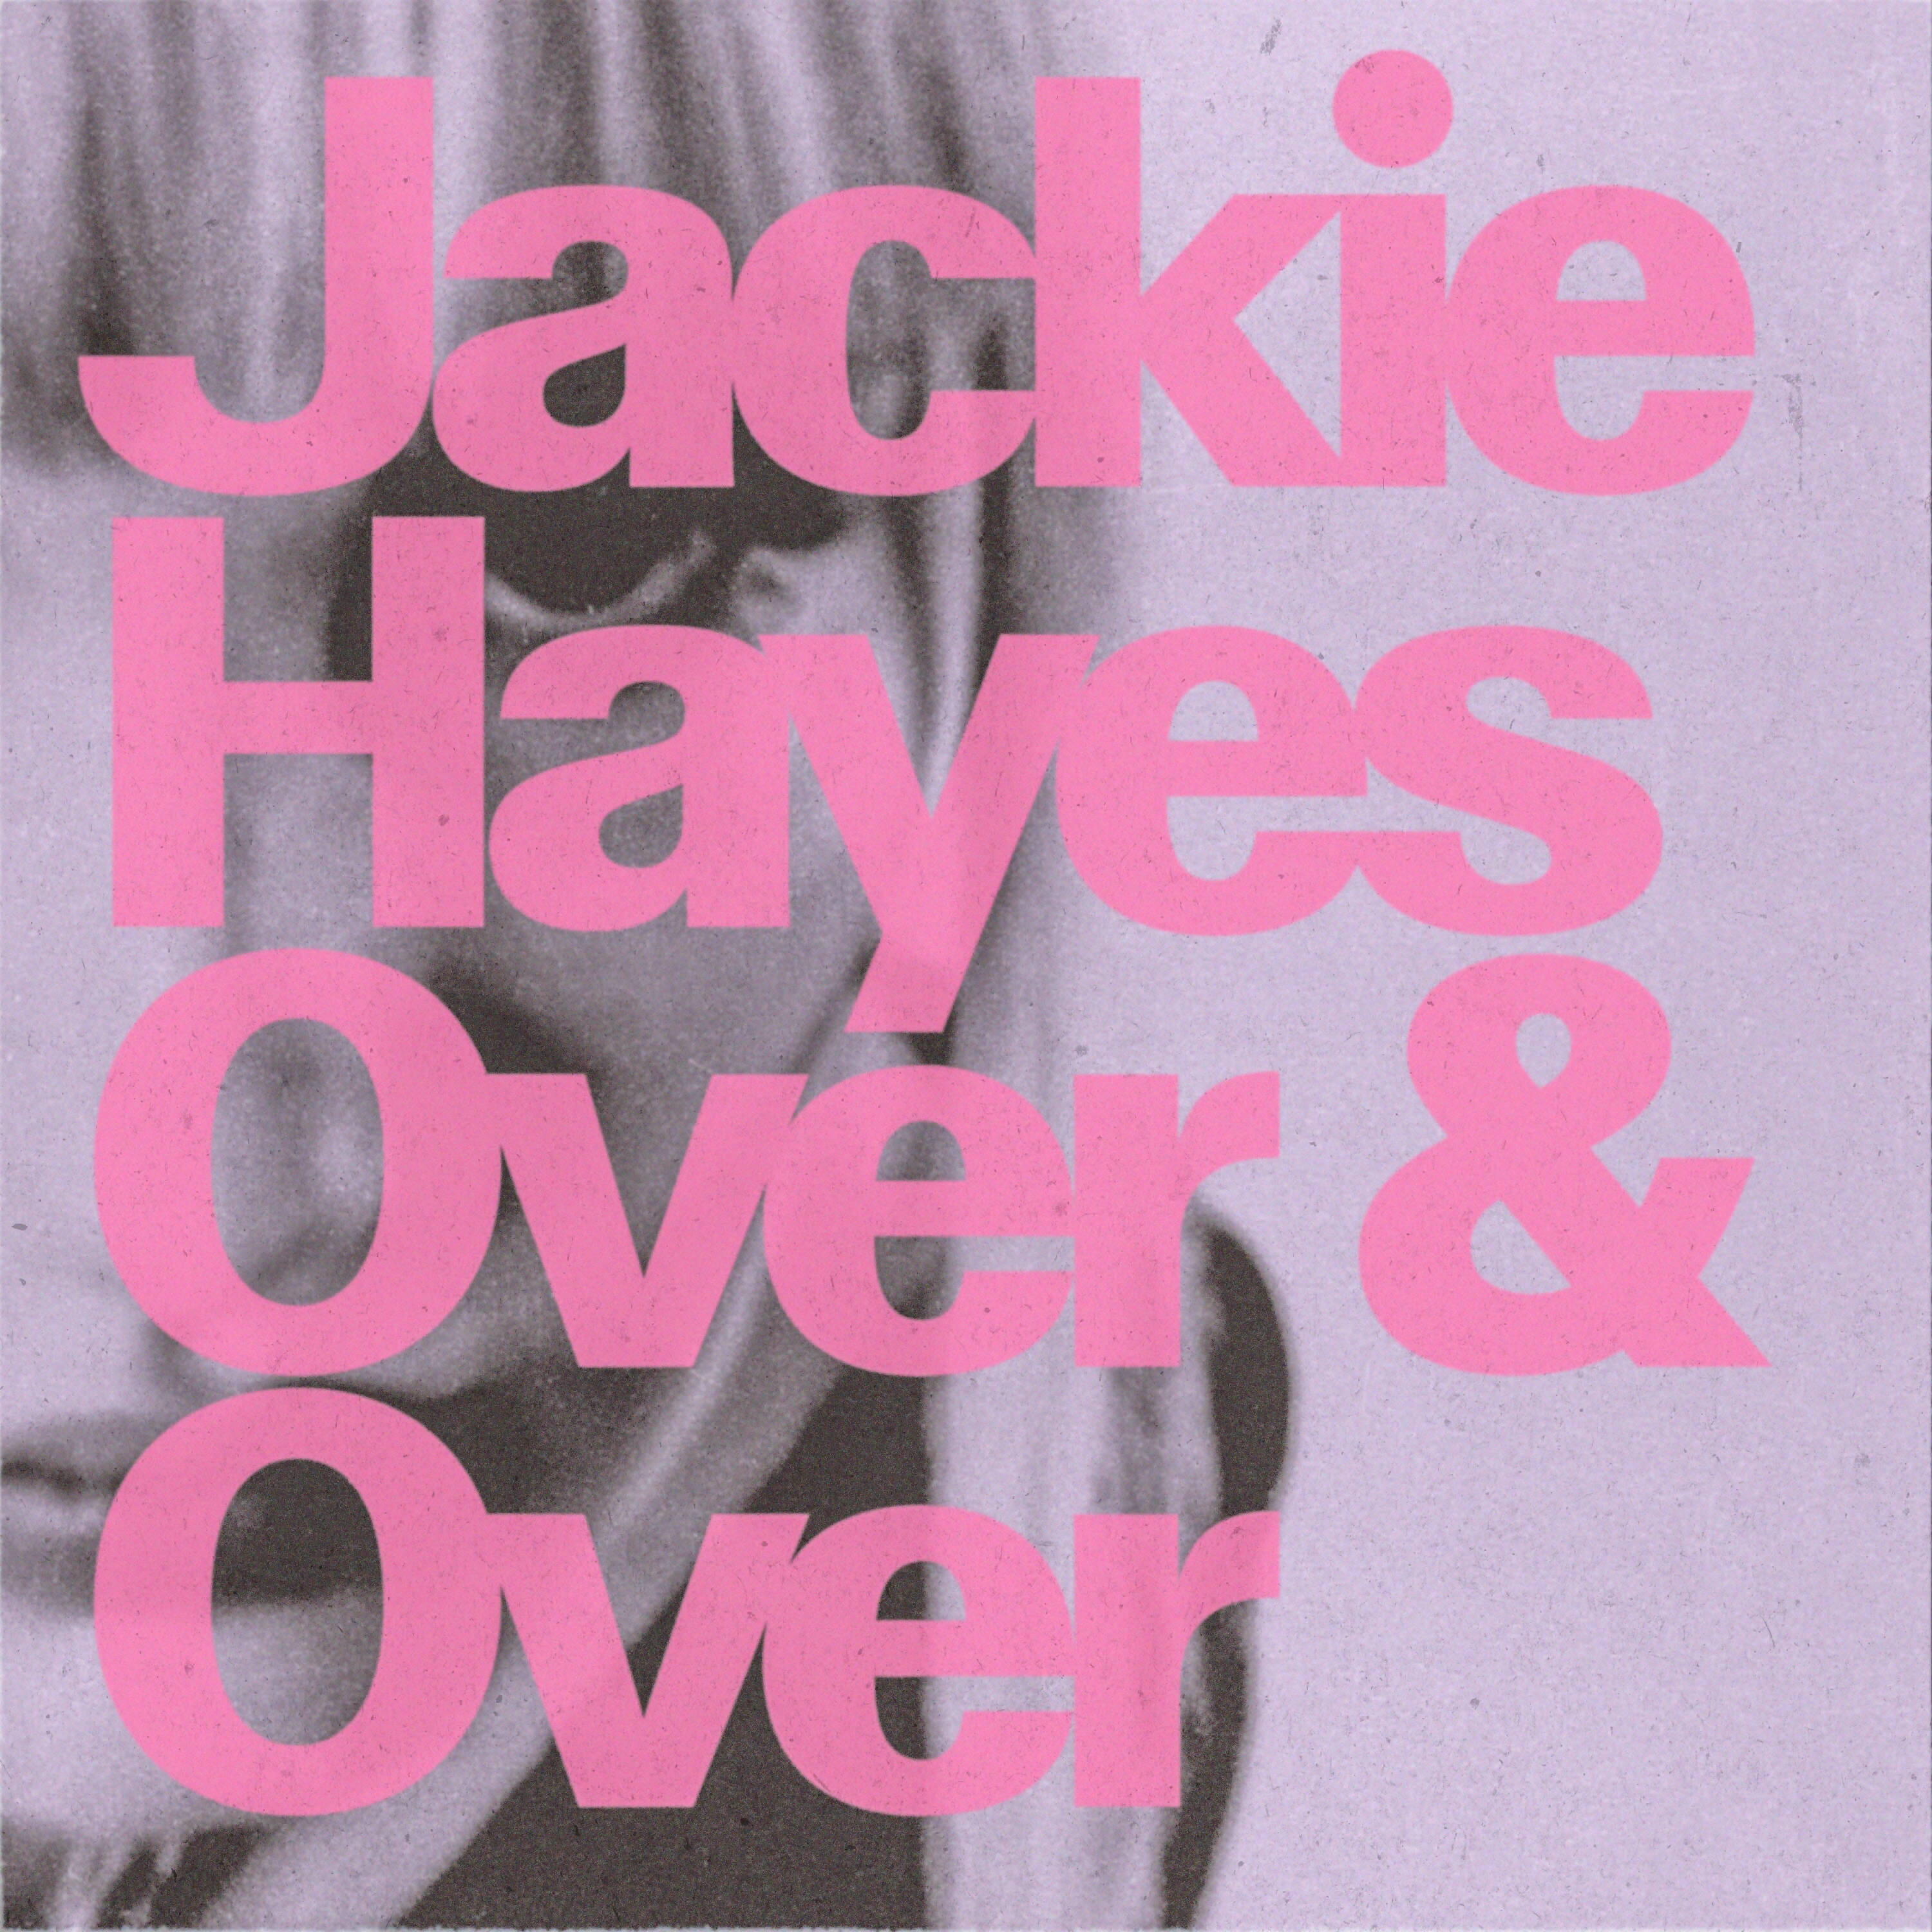 Jackie Hayes Over & Over